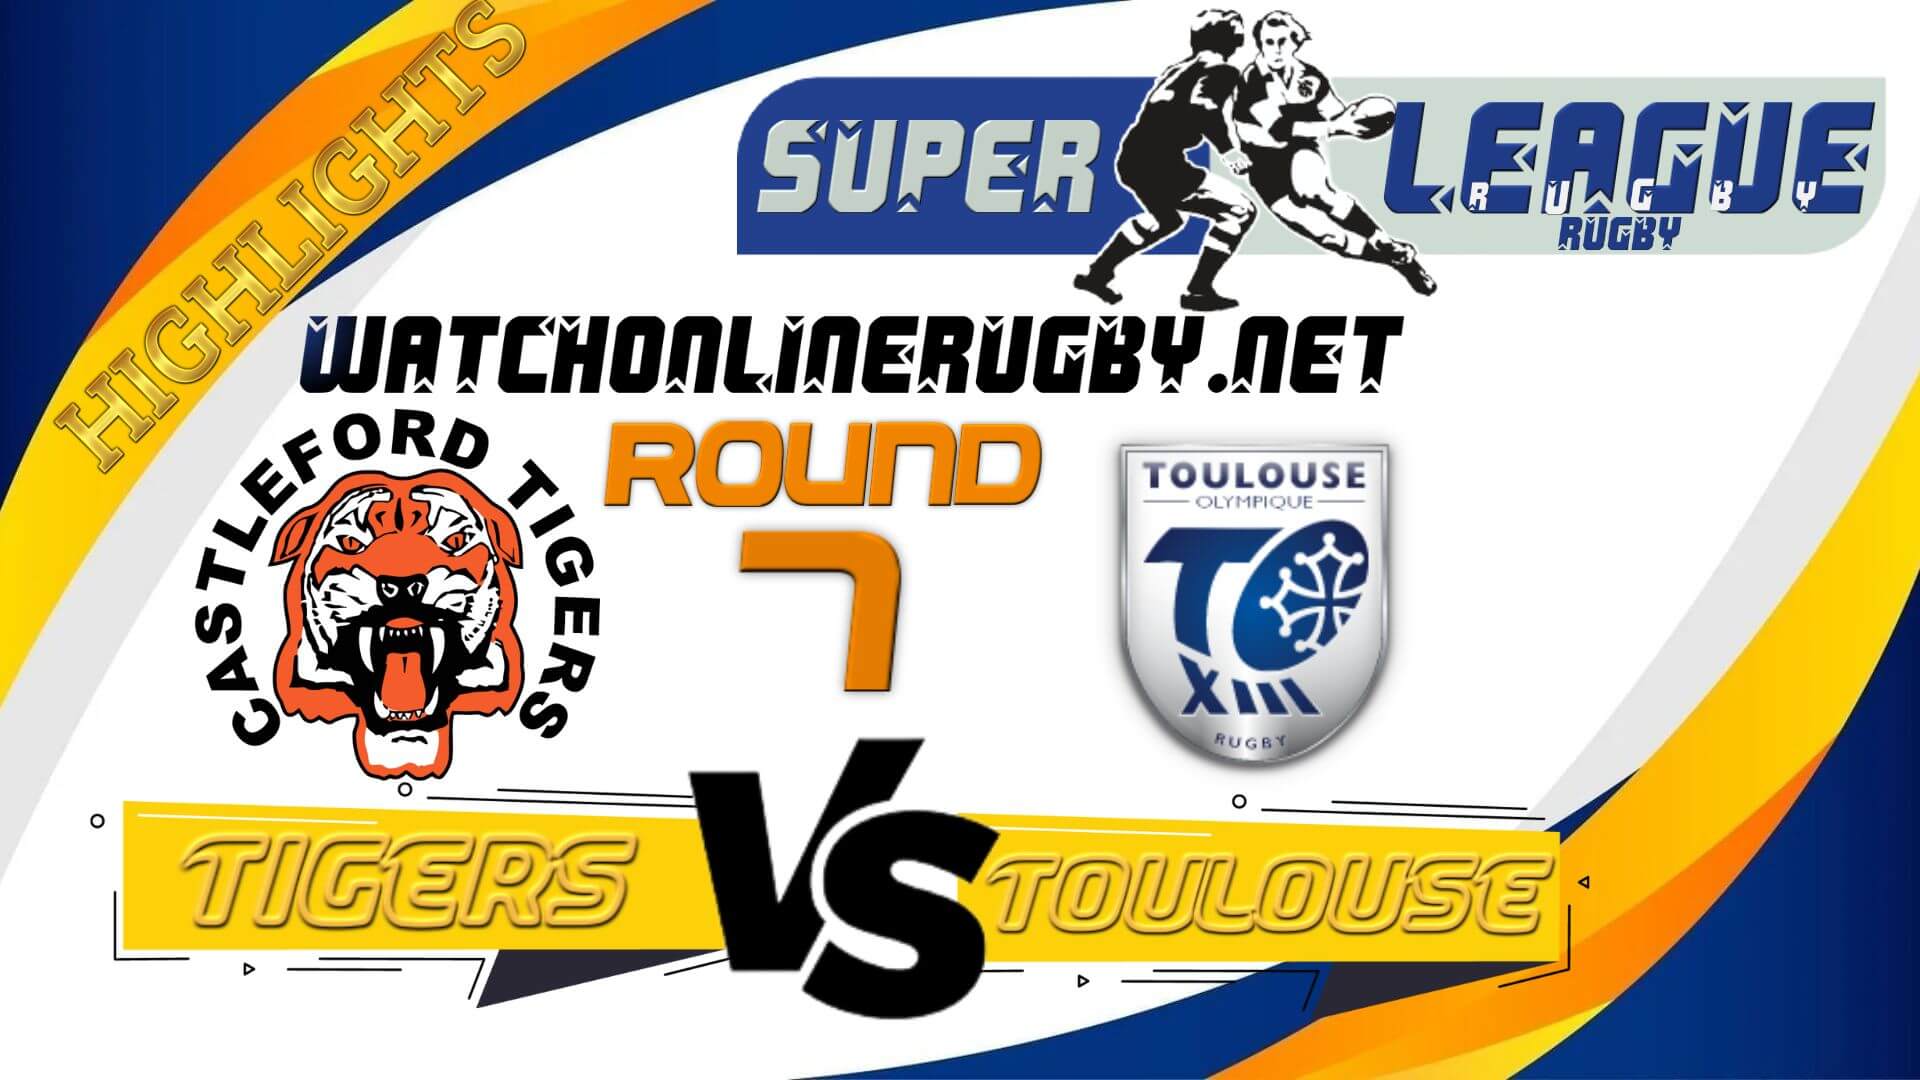 Castleford Tigers Vs Toulouse Super League Rugby 2022 RD 7